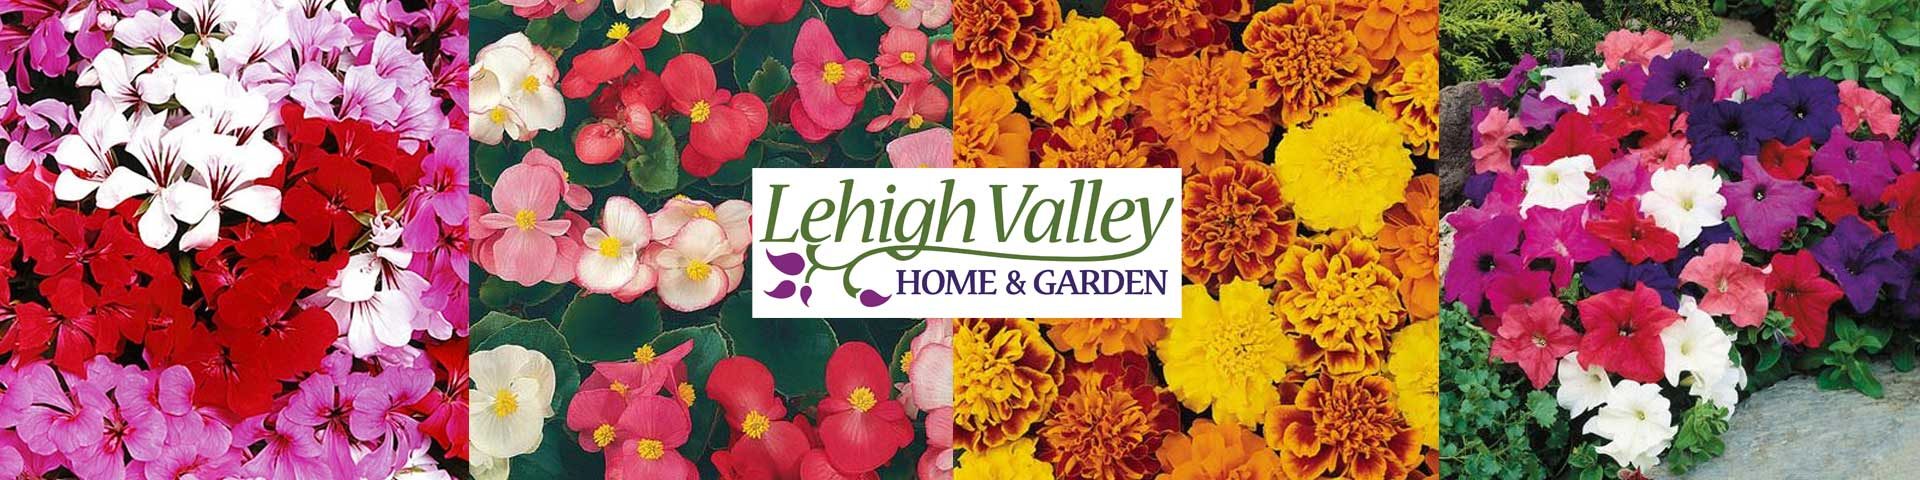 Various flowers and Lehigh Valley Home and Garden Center logo